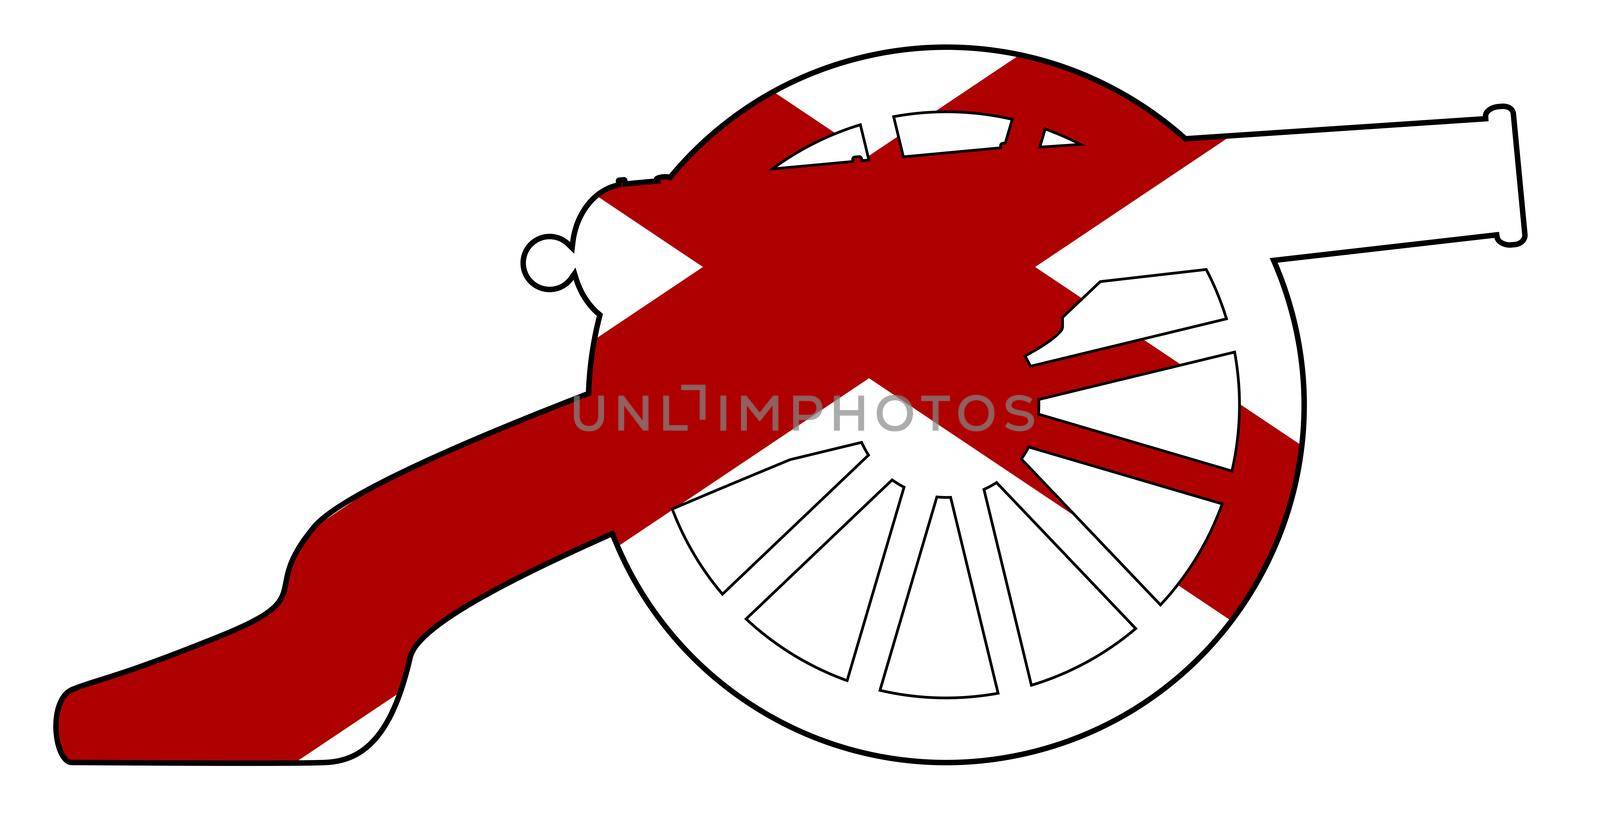 Typical American civil war cannon gun with Alabama state flag isolated on a white background